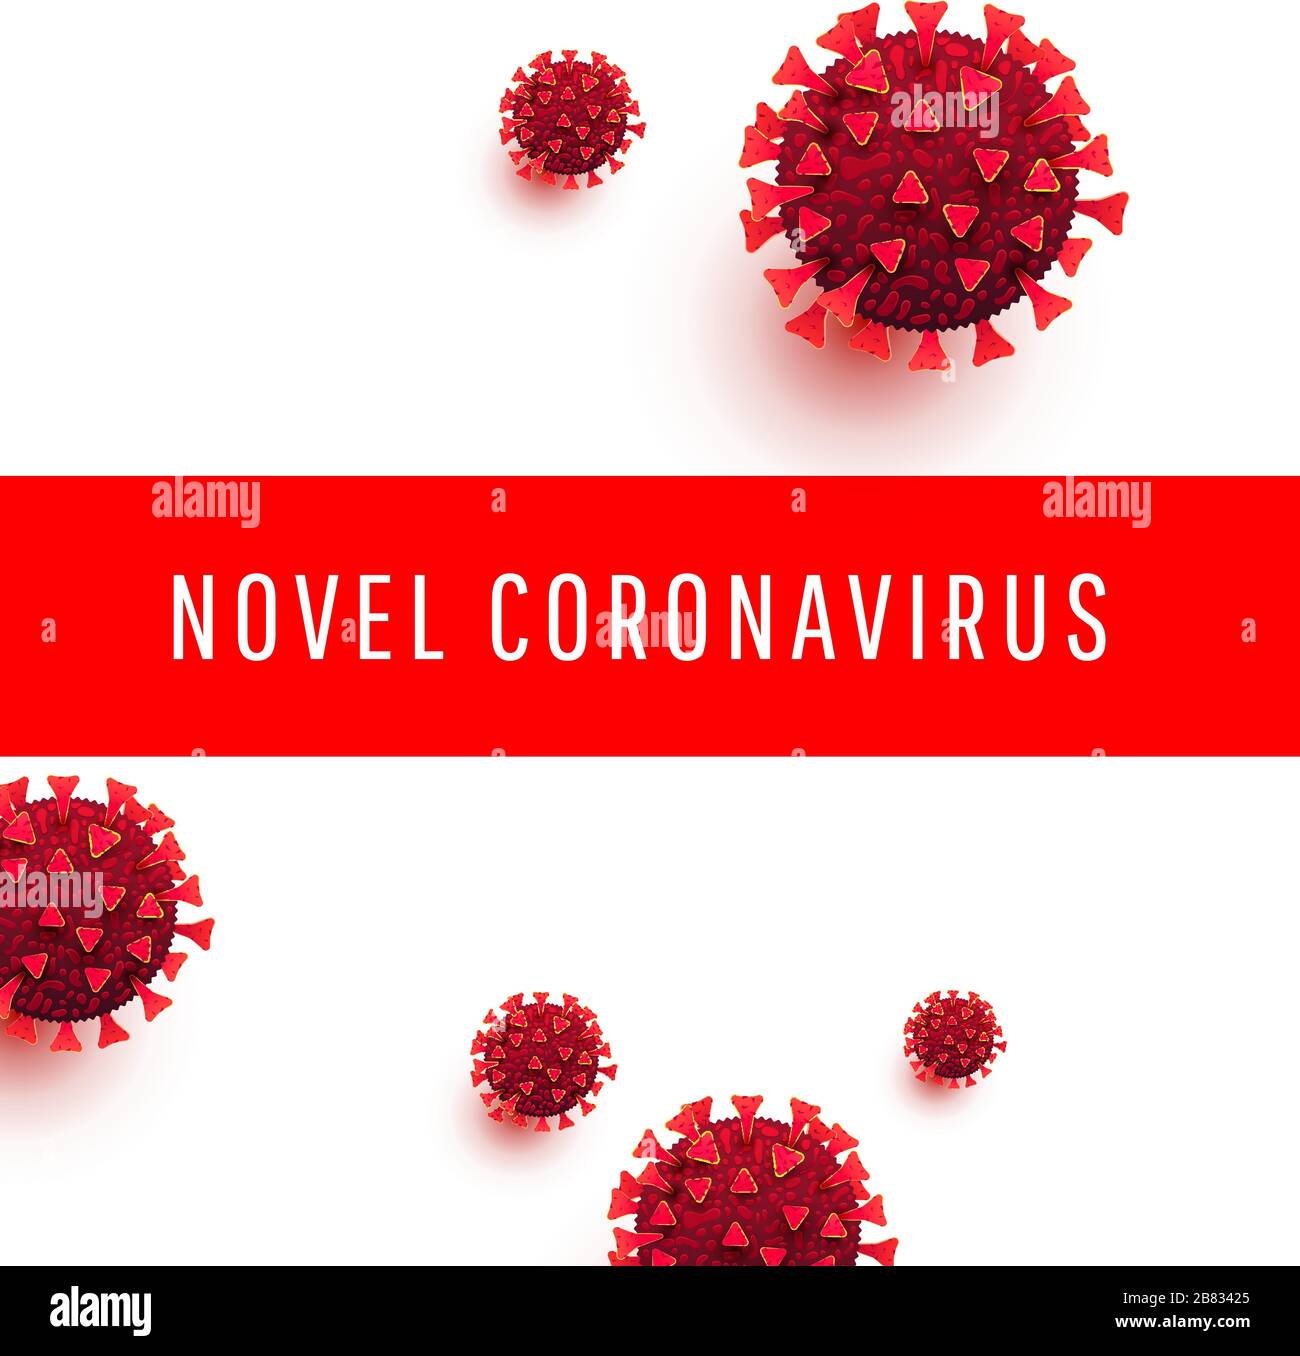 Novel Coronavirus outbreaks in world. COVID 19 infection conept. SARS-CoV-2 molecule and text on a white background. Vector illustration Stock Vector